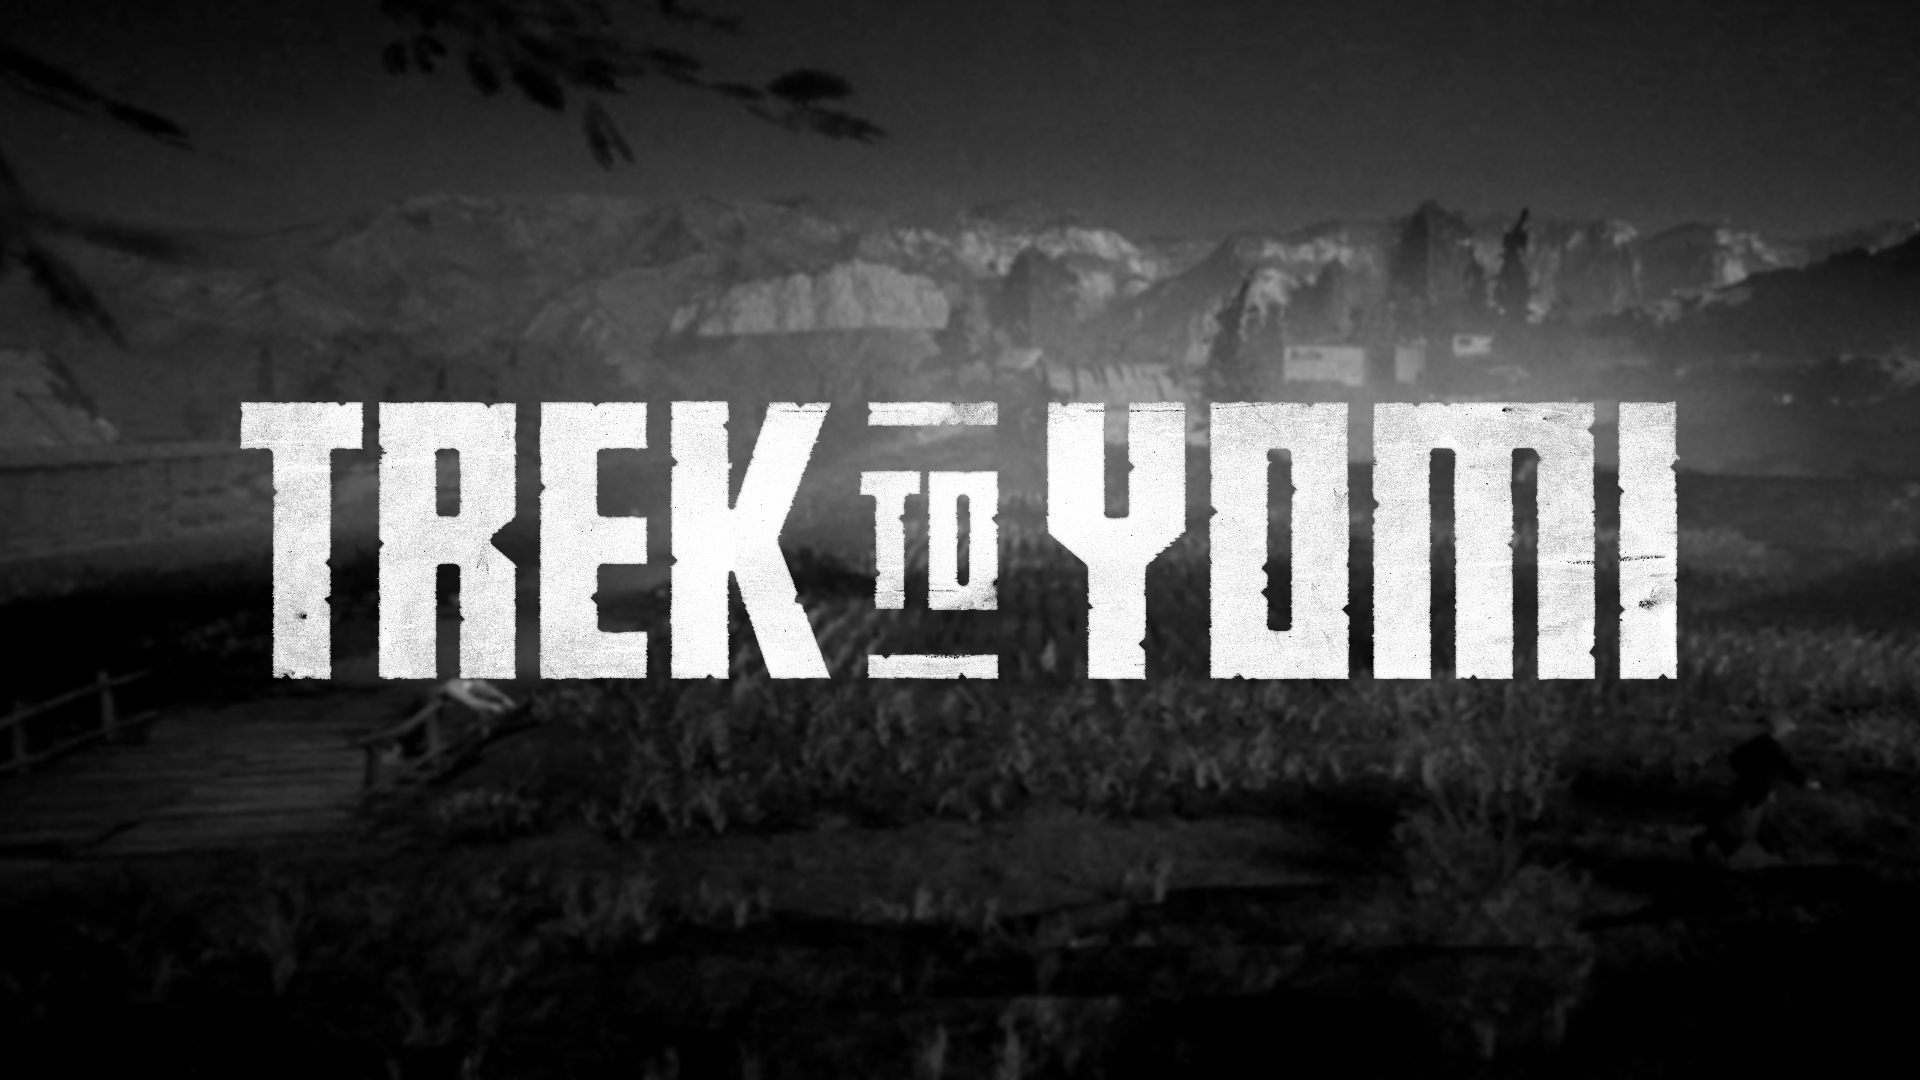 Video For Announcing the Cinematic Adventure Game Trek to Yomi